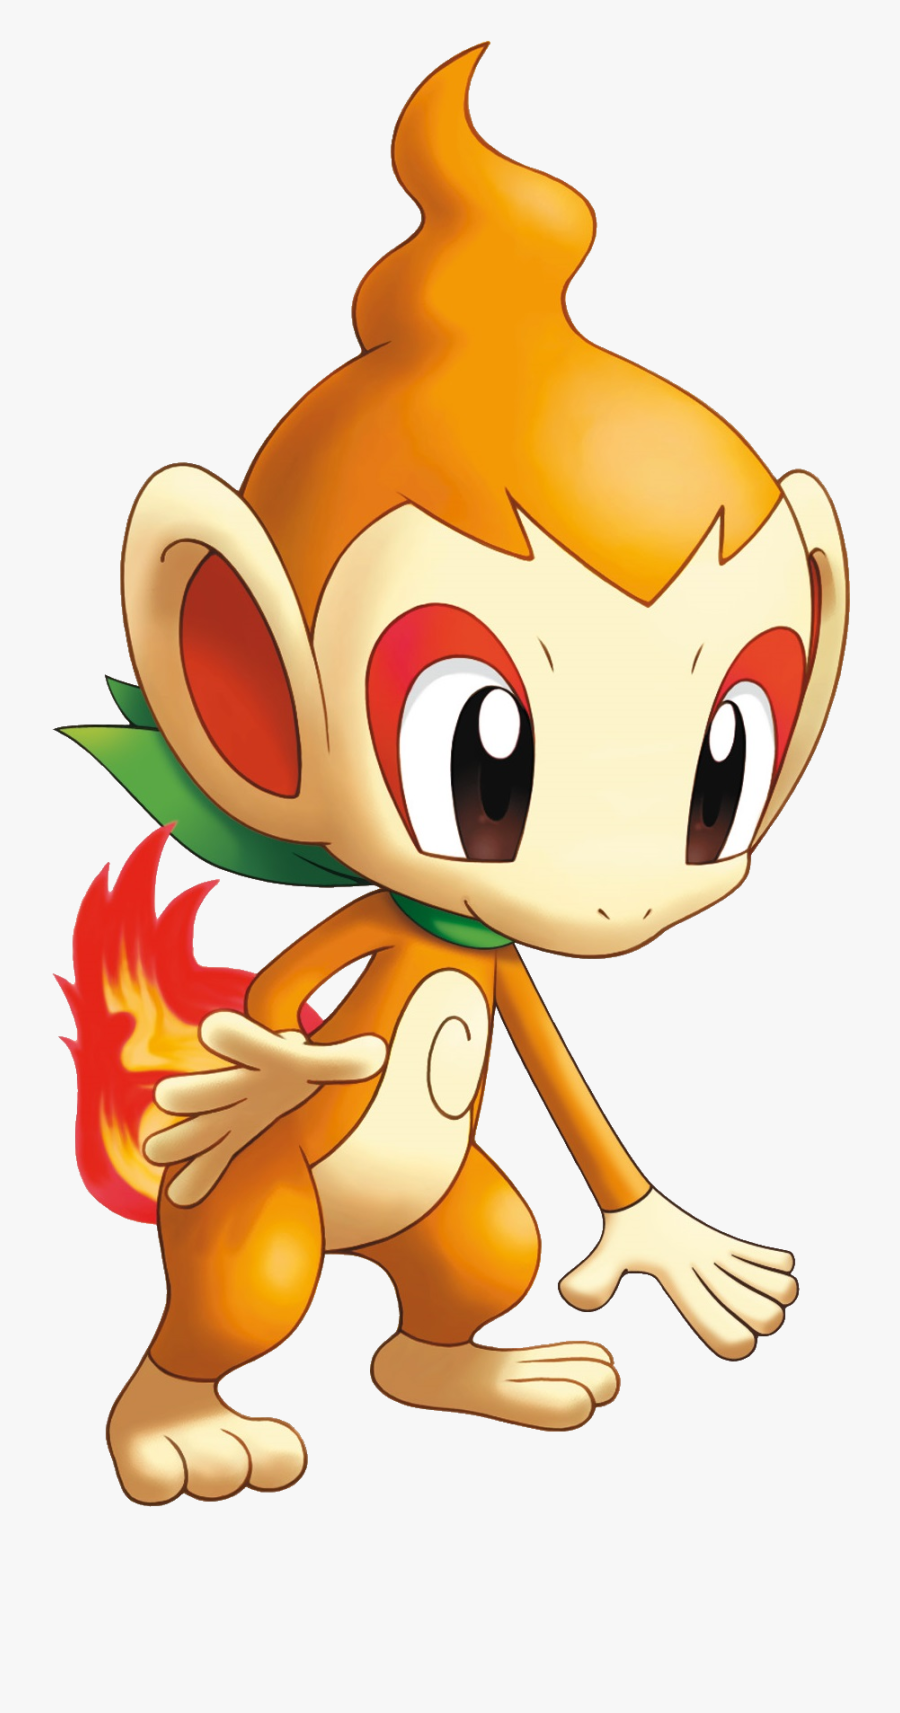 Pokemon Png Image - Pokemon Mystery Dungeon Chimchar, Transparent Clipart